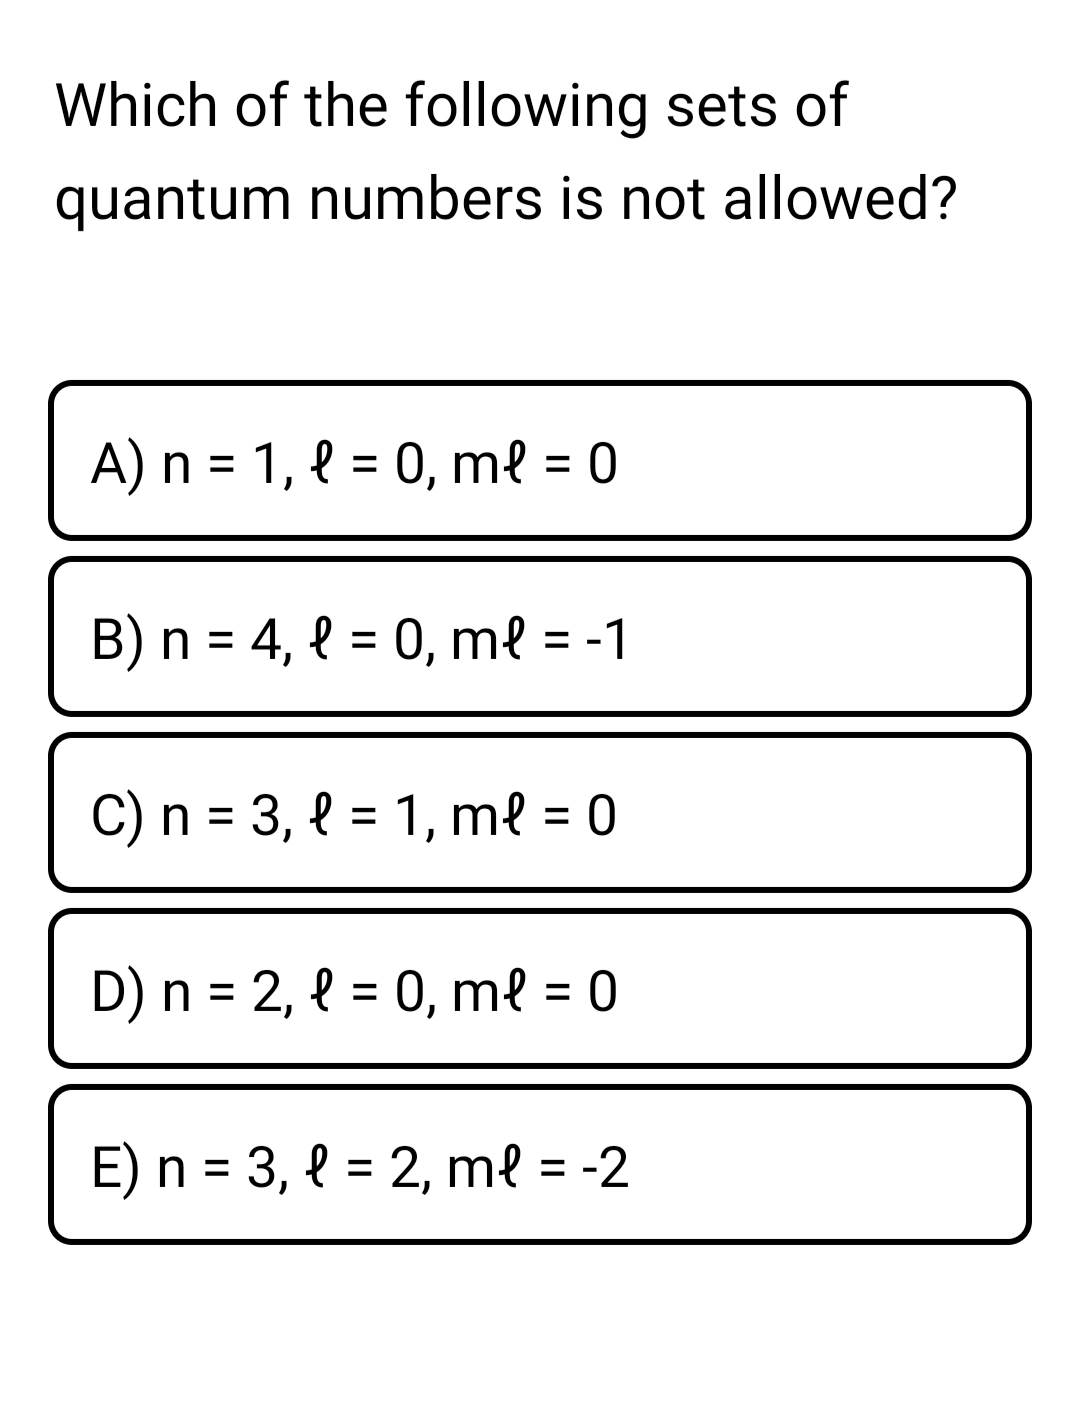 Which of the following sets of
quantum numbers is not allowed?
A) n = 1, { = 0, me = 0
B) n = 4, { = 0, m{ = -1
%3D
C) n = 3, { = 1, m{ = 0
%3D
D) n = 2, { = 0, me = 0
E) n = 3, { = 2, me = -2
%3D
